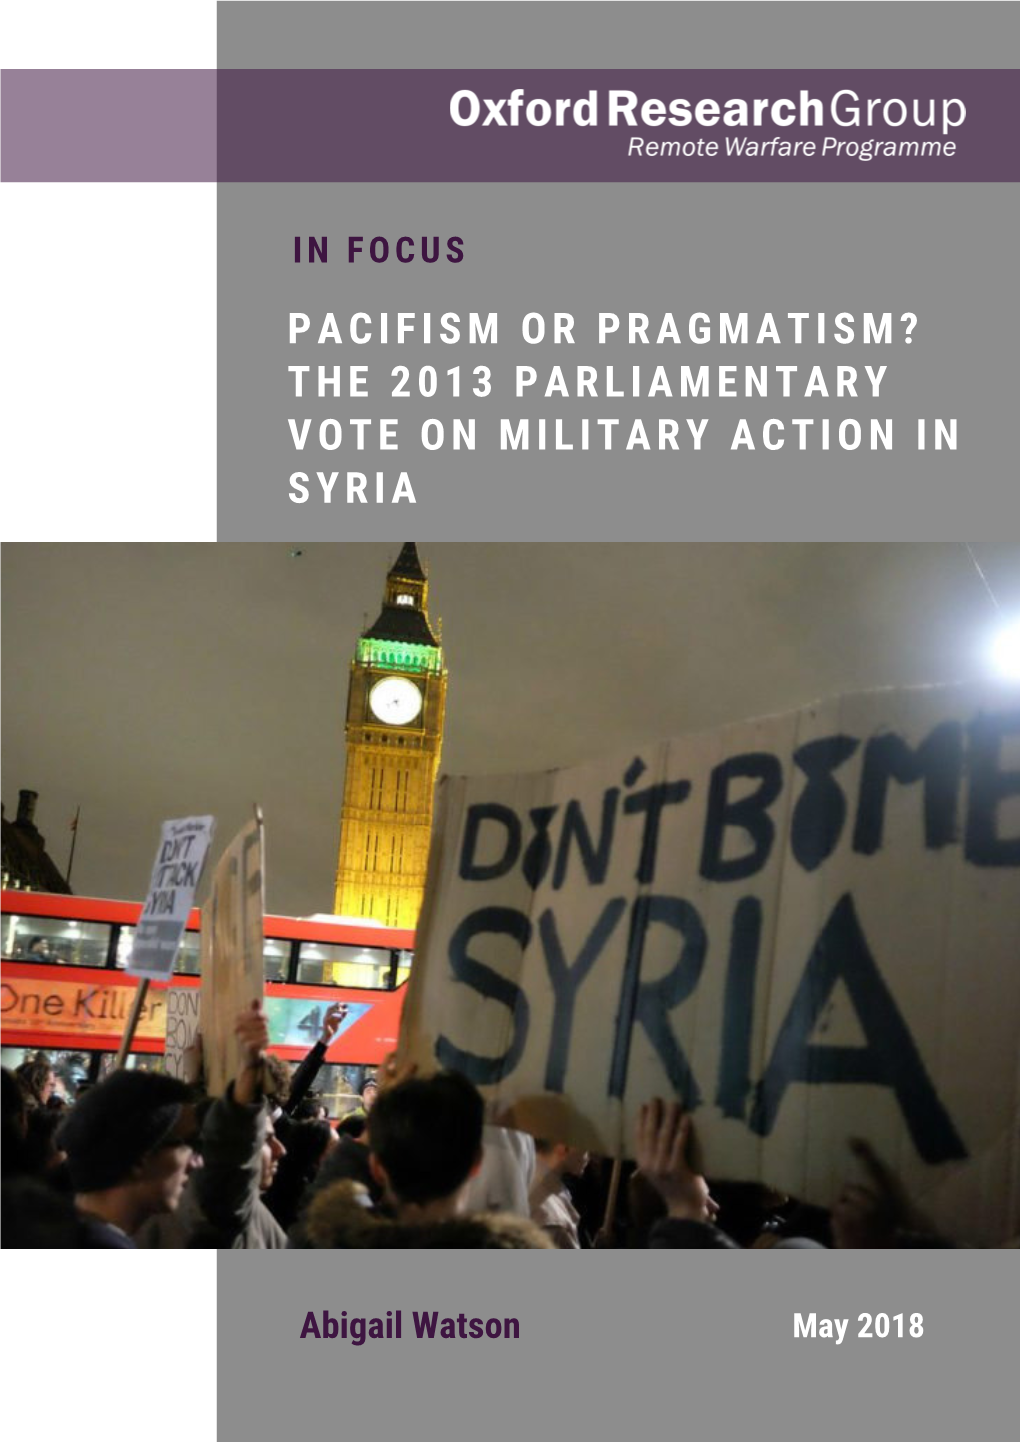 The 2013 Parliamentary Vote on Military Action in Syria